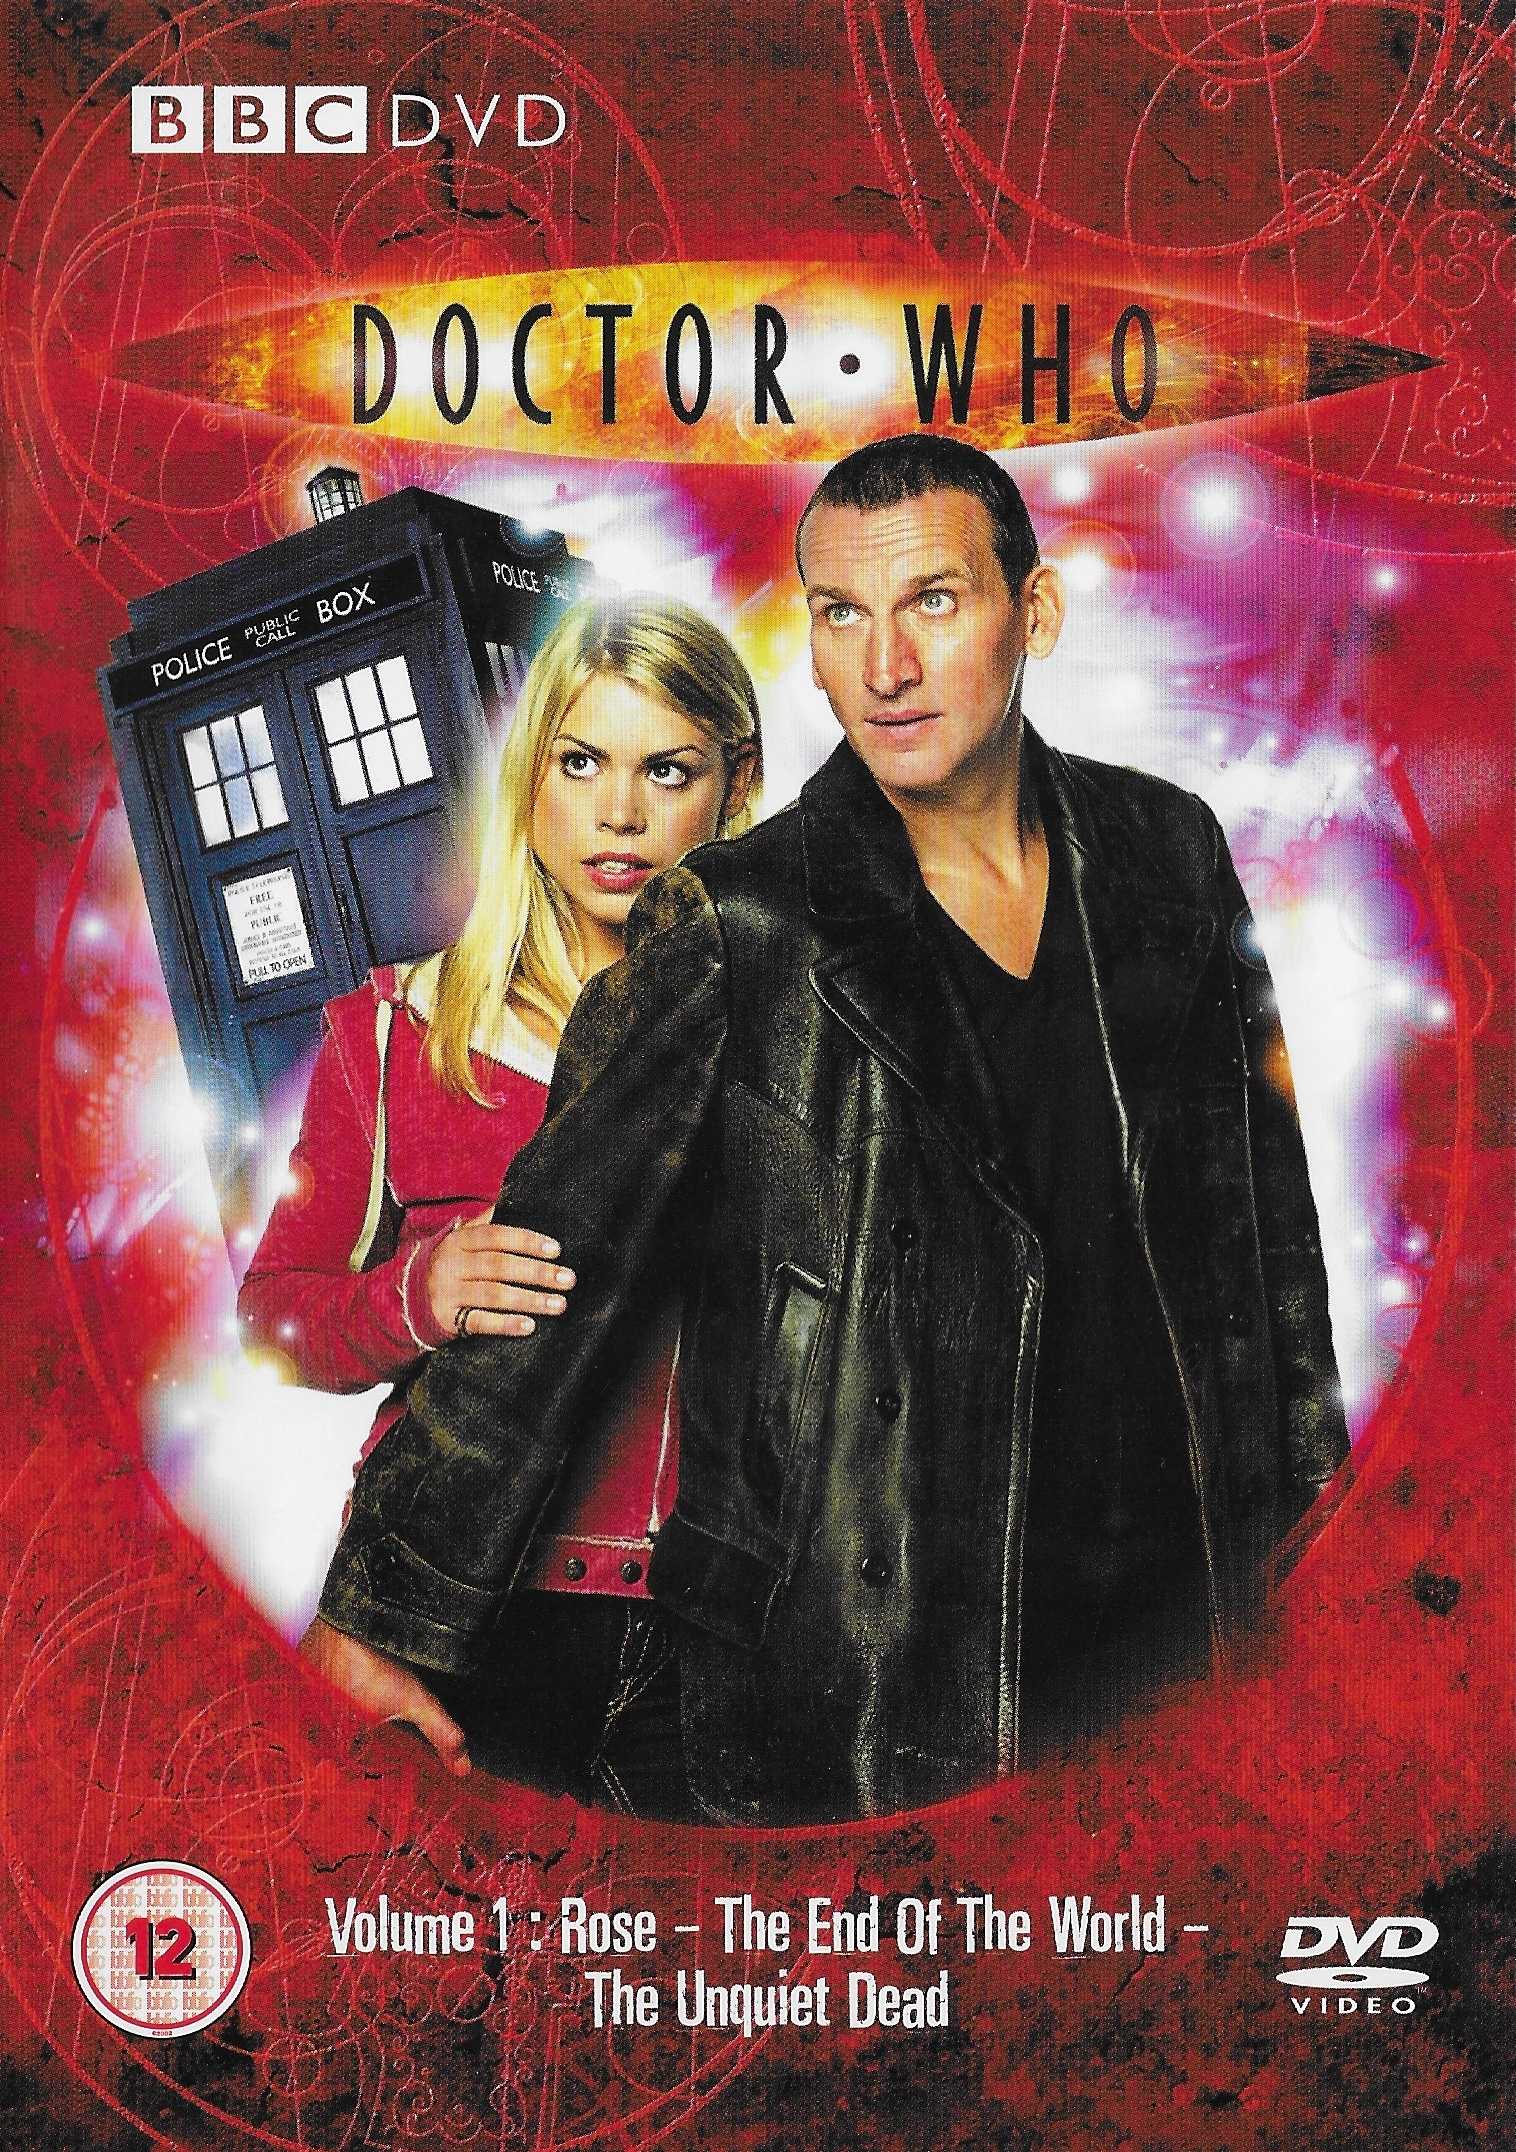 Picture of BBCDVD 1755 Doctor Who - New series, volume 1 by artist Russell T Davies / Mark Gatiss from the BBC dvds - Records and Tapes library